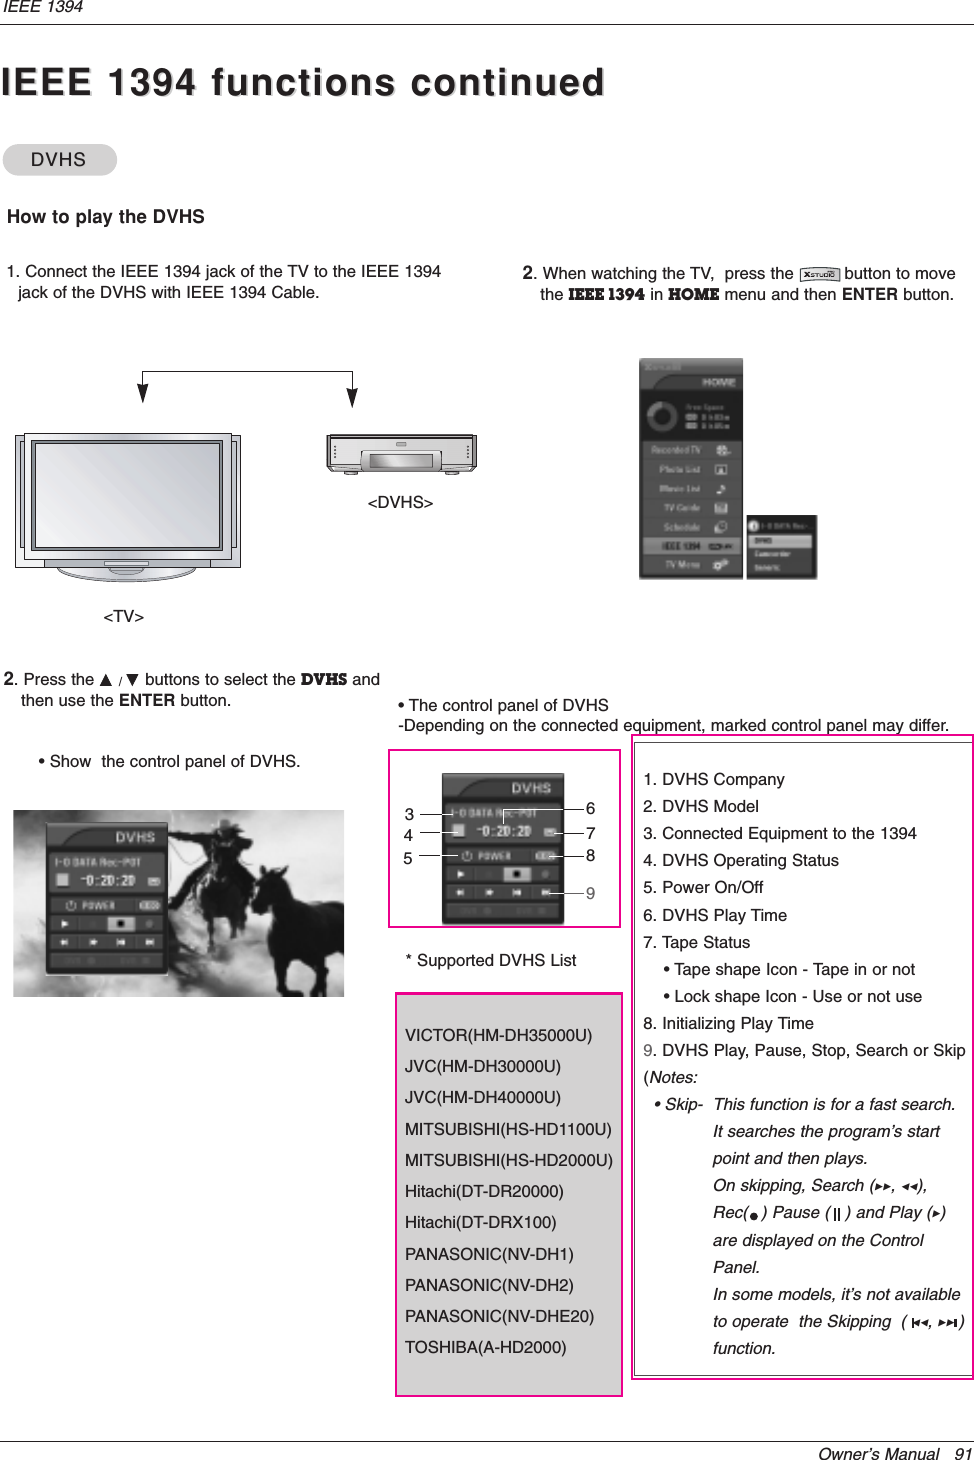 Owner’s Manual   91IEEE 1394IEEE 1394 functions continuedIEEE 1394 functions continuedDVHS DVHS VHow to play the DVHS&lt;TV&gt;&lt;DVHS&gt;1. Connect the IEEE 1394 jack of the TV to the IEEE 1394jack of the DVHS with IEEE 1394 Cable.2. When watching the TV,  press the          button to movethe IEEE 1394 in HOME menu and then ENTER button.* Supported DVHS ListVICTOR(HM-DH35000U) JVC(HM-DH30000U) JVC(HM-DH40000U) MITSUBISHI(HS-HD1100U) MITSUBISHI(HS-HD2000U) Hitachi(DT-DR20000) Hitachi(DT-DRX100) PANASONIC(NV-DH1) PANASONIC(NV-DH2) PANASONIC(NV-DHE20) TOSHIBA(A-HD2000)• The control panel of DVHS-Depending on the connected equipment, marked control panel may differ.341. DVHS Company2. DVHS Model3. Connected Equipment to the 13944. DVHS Operating Status5. Power On/Off6. DVHS Play Time7. Tape Status• Tape shape Icon - Tape in or not • Lock shape Icon - Use or not use8. Initializing Play Time9. DVHS Play, Pause, Stop, Search or Skip(Notes: • Skip-  This function is for a fast search.It searches the program’s start point and then plays.On skipping, Search (GG, FF), Rec(&quot;) Pause (   ) and Play (G) are displayed on the Control Panel.In some models, it’s not available to operate  the Skipping  ( FF, GG )function.2. Press the D / Ebuttons to select the DVHS andthen use the ENTER button.• Show  the control panel of DVHS.57689